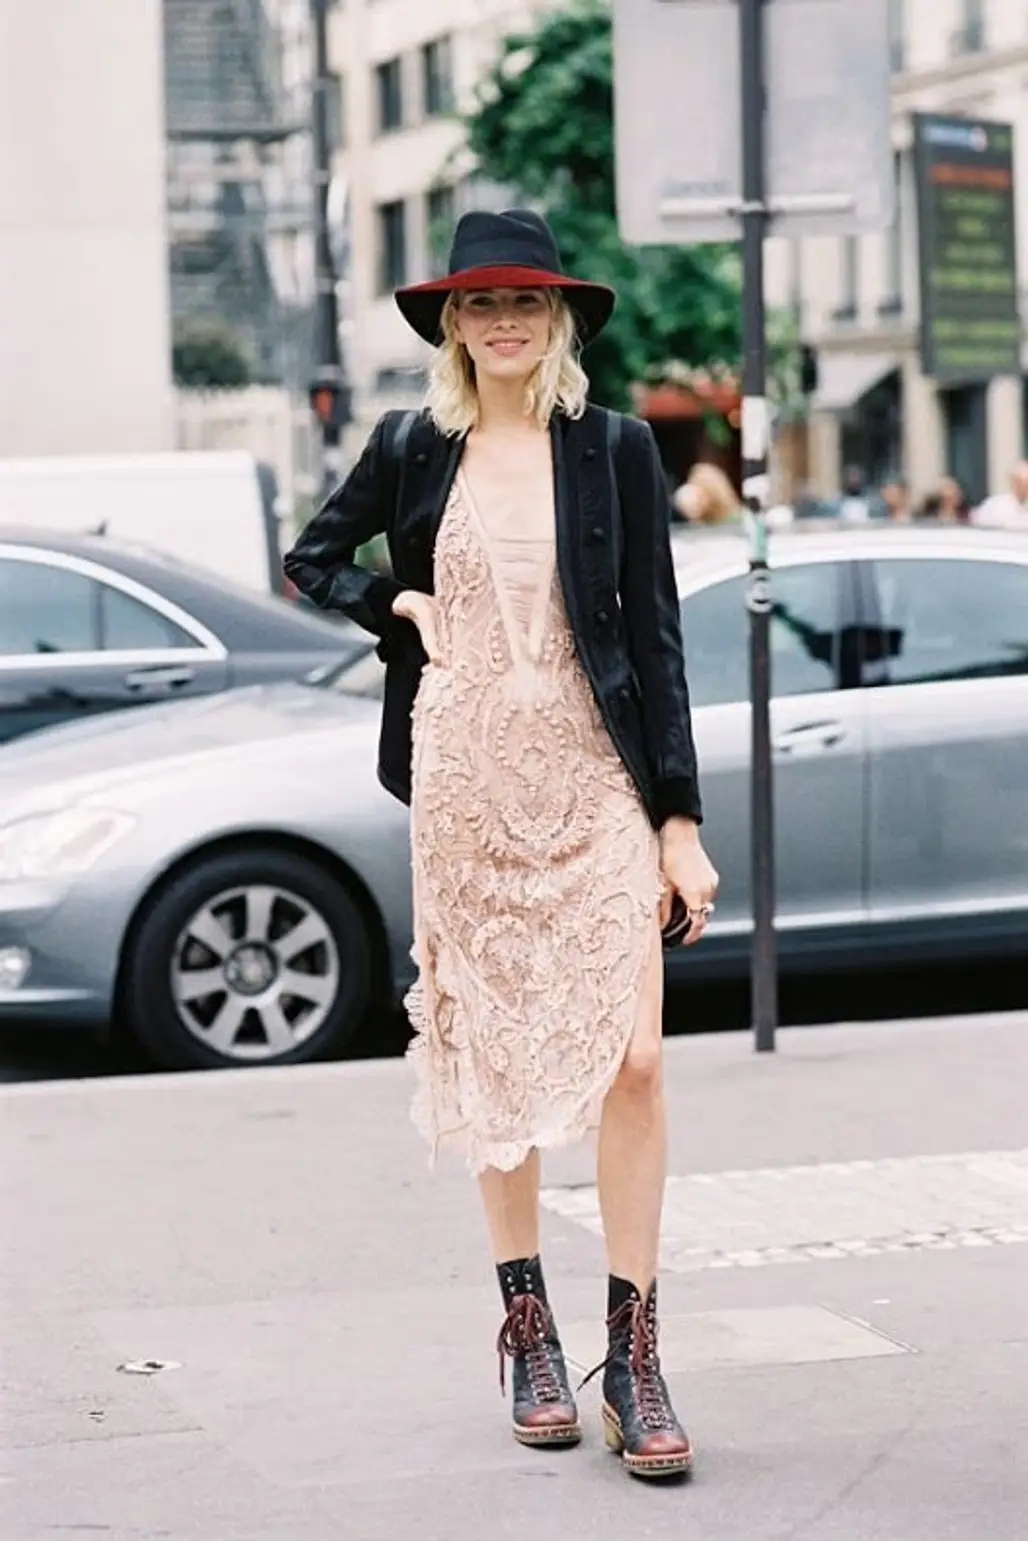 7 Street Style Ways to Wear the Lace Trend